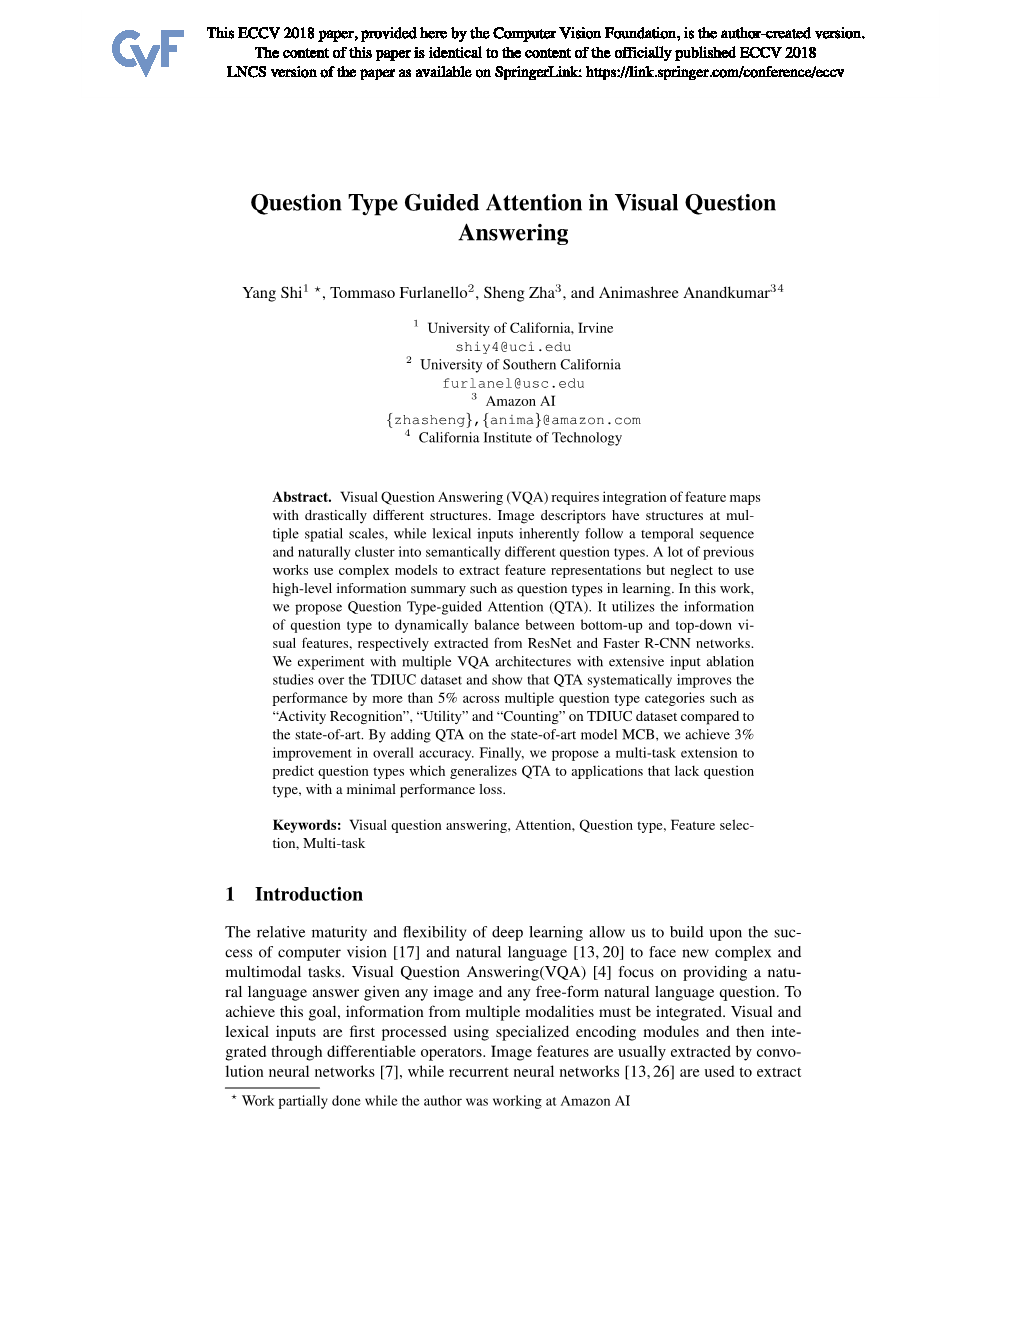 Question Type Guided Attention in Visual Question Answering